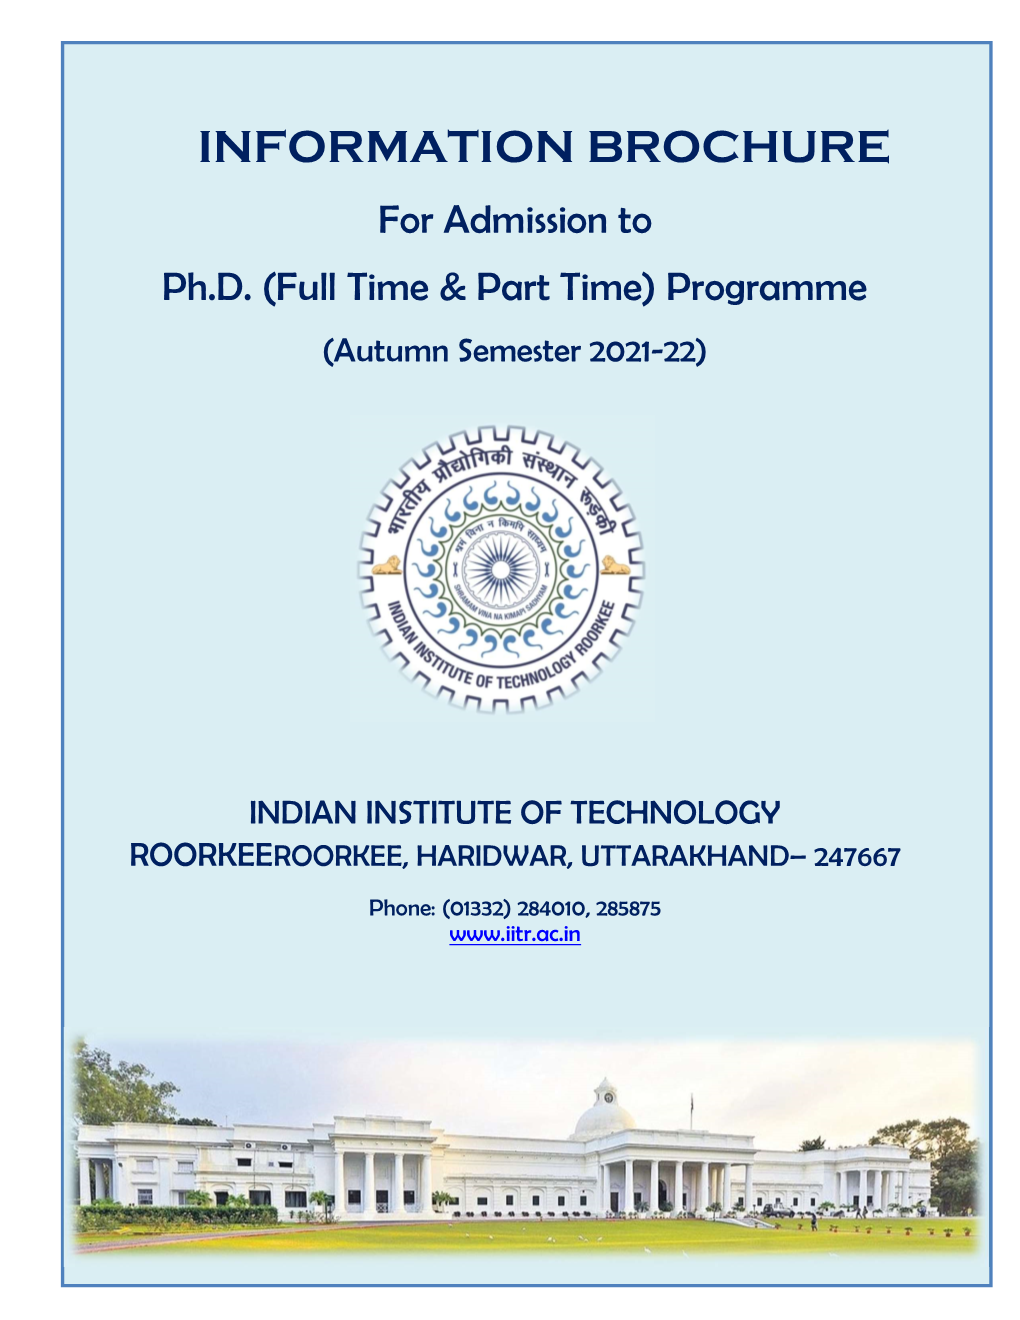 INFORMATION BROCHURE for Admission to Ph.D